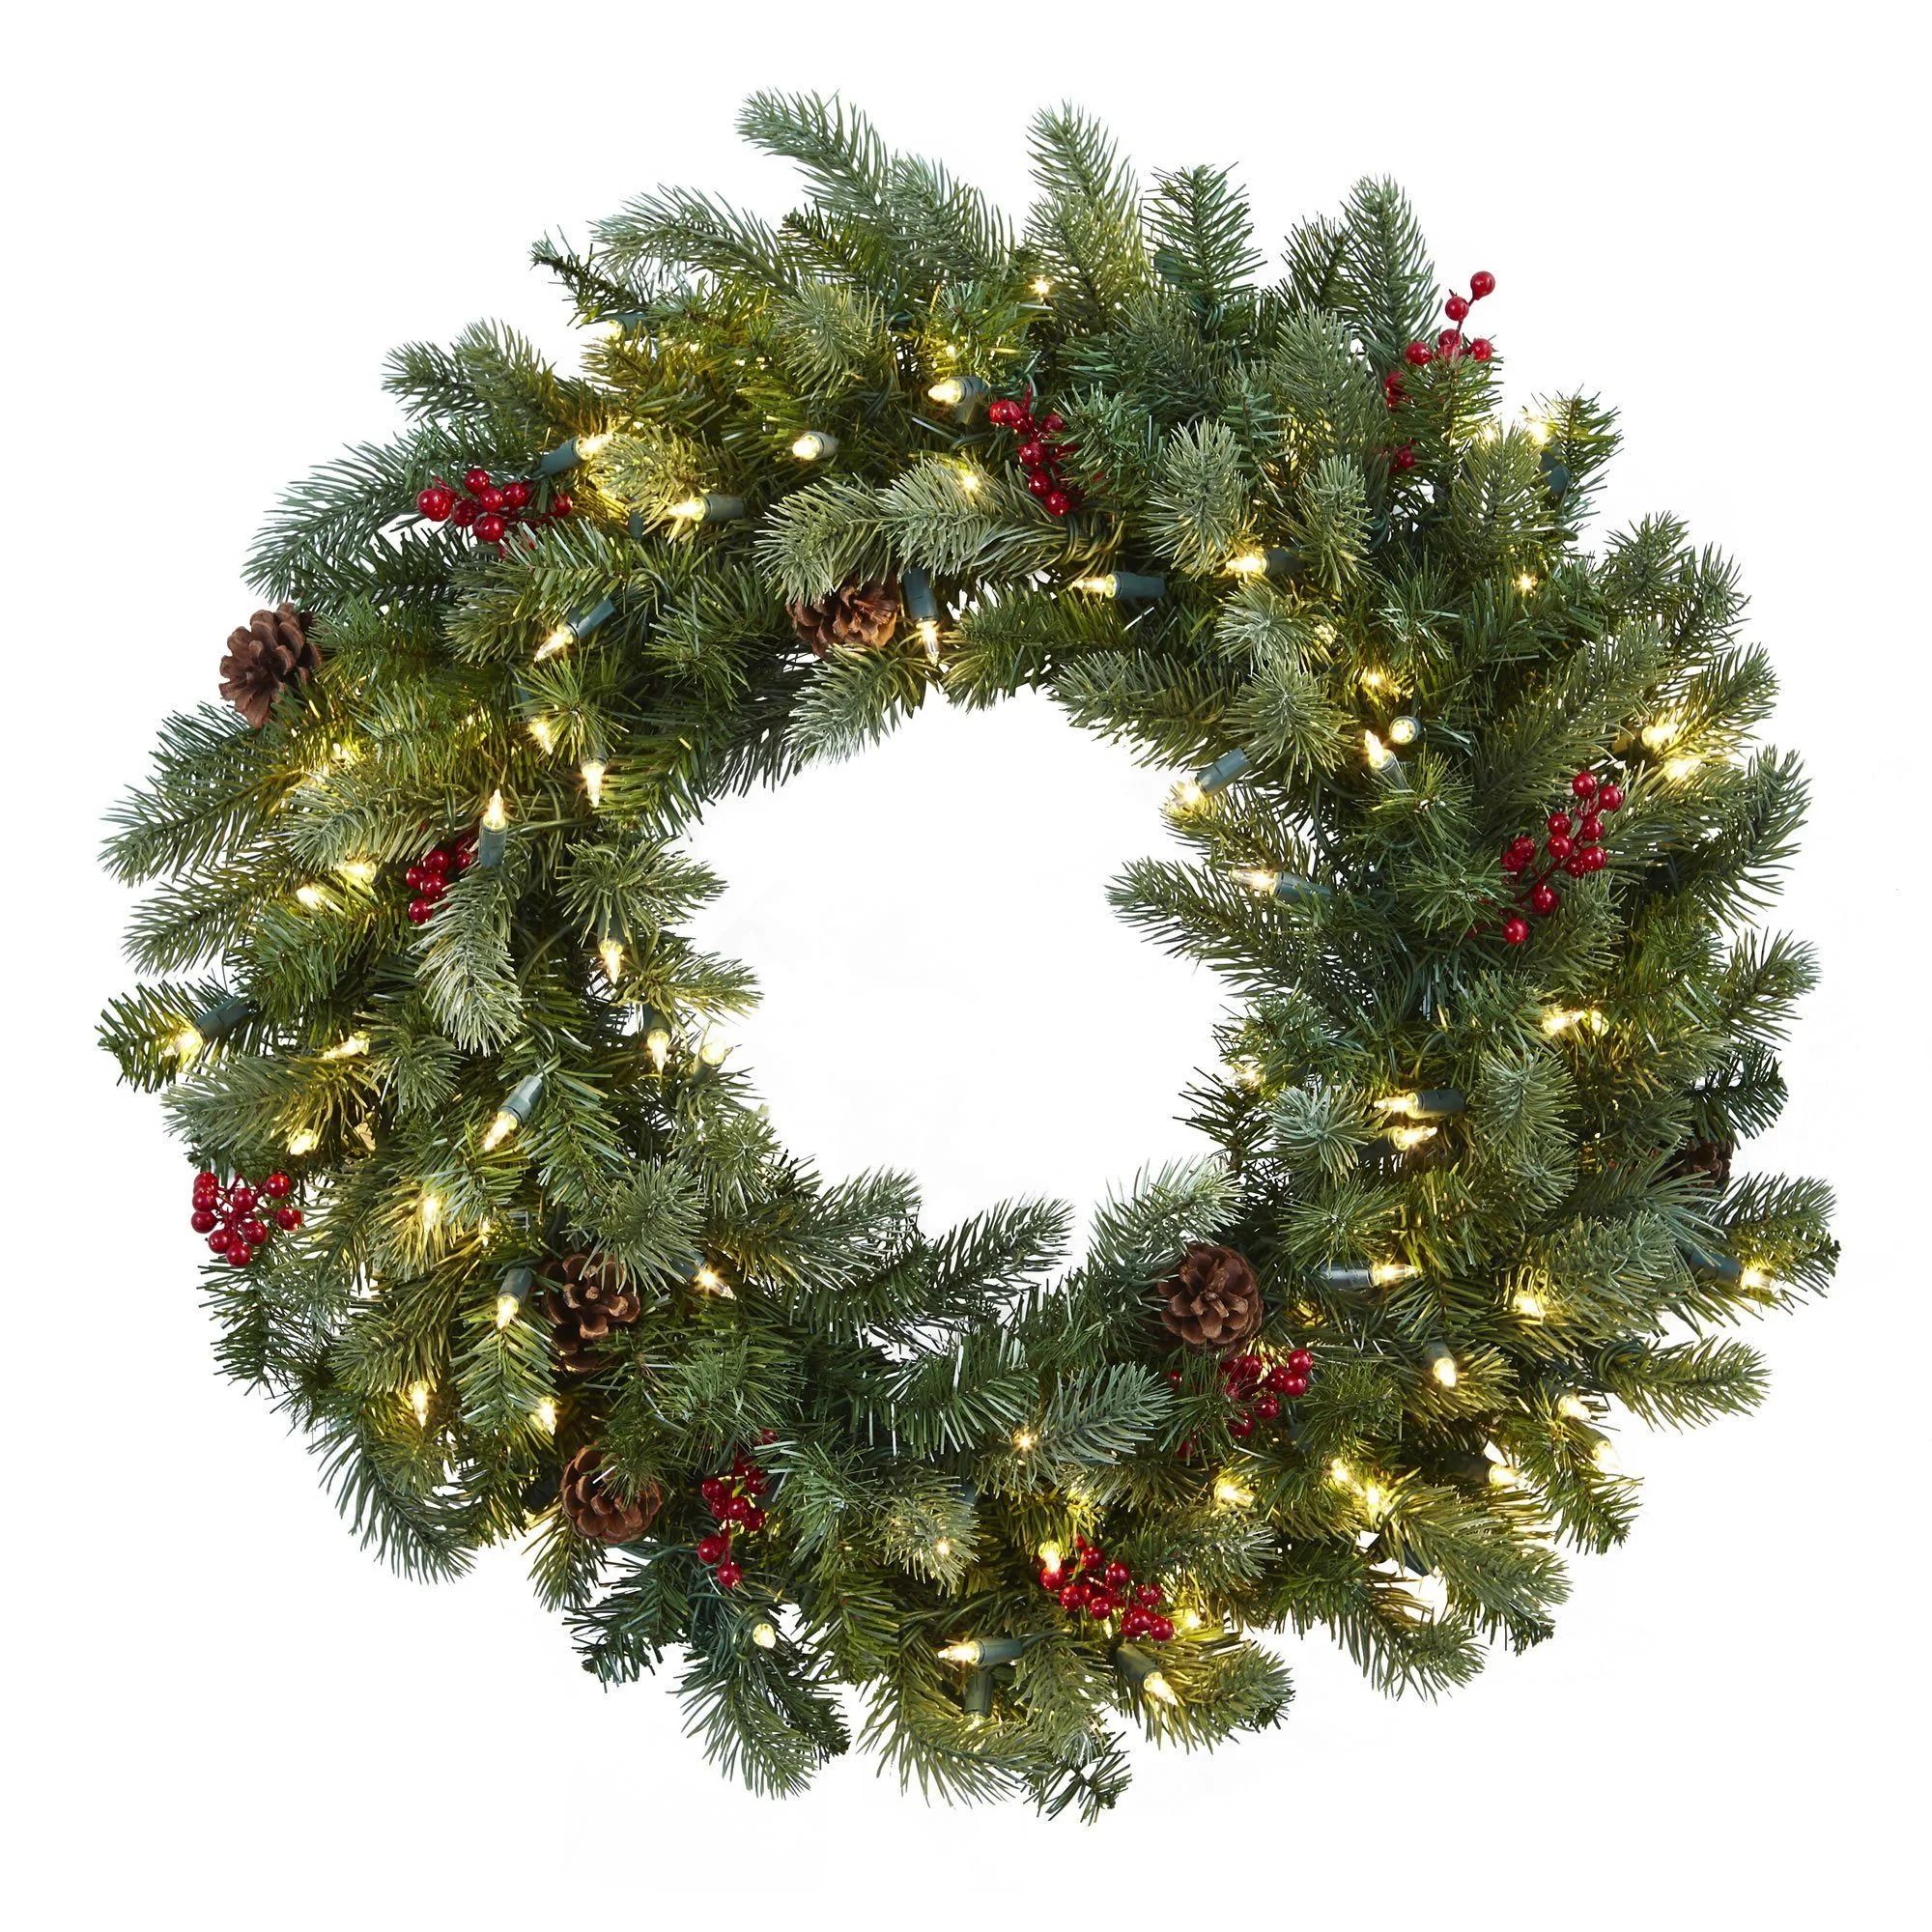 30” Lighted Pine Wreath w/Berries & Pine Cones | Nearly Natural